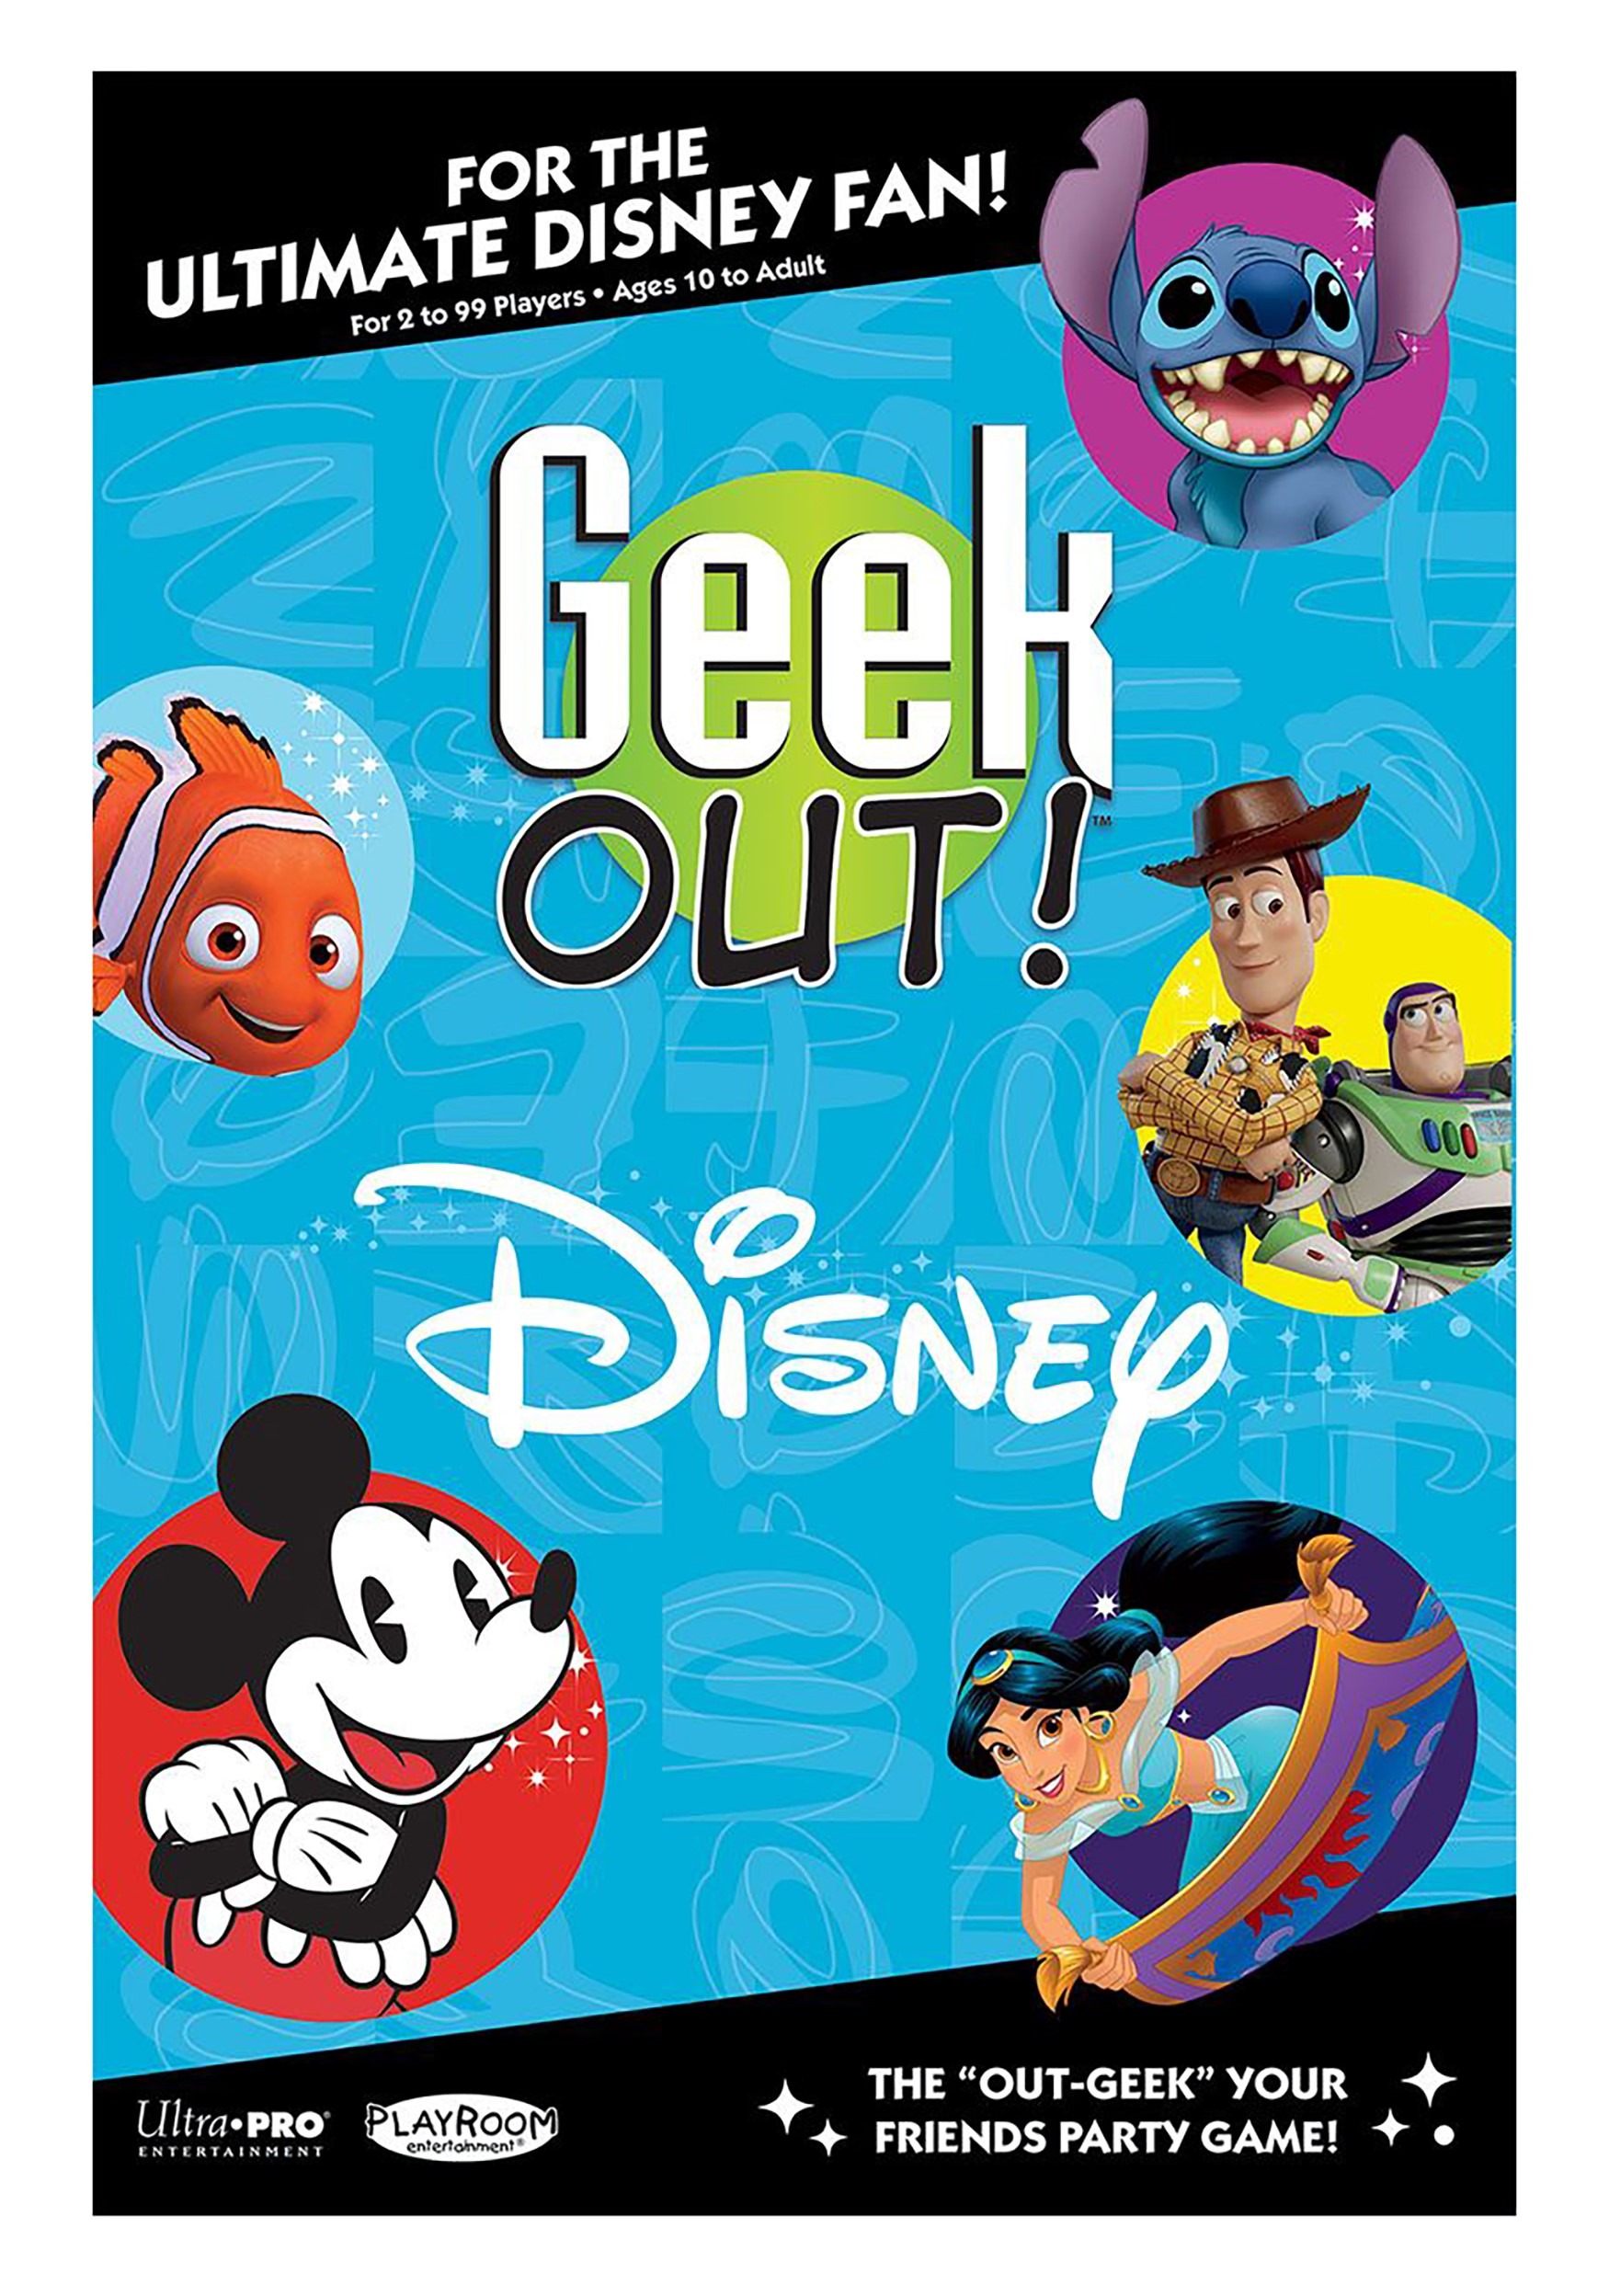  Smash Up: Disney Edition, Collectible Disney Card Game, Featuring Disney Characters from Frozen, Big Hero 6, The Lion King,  Aladdin, The Nightmare Before Christmas, & More